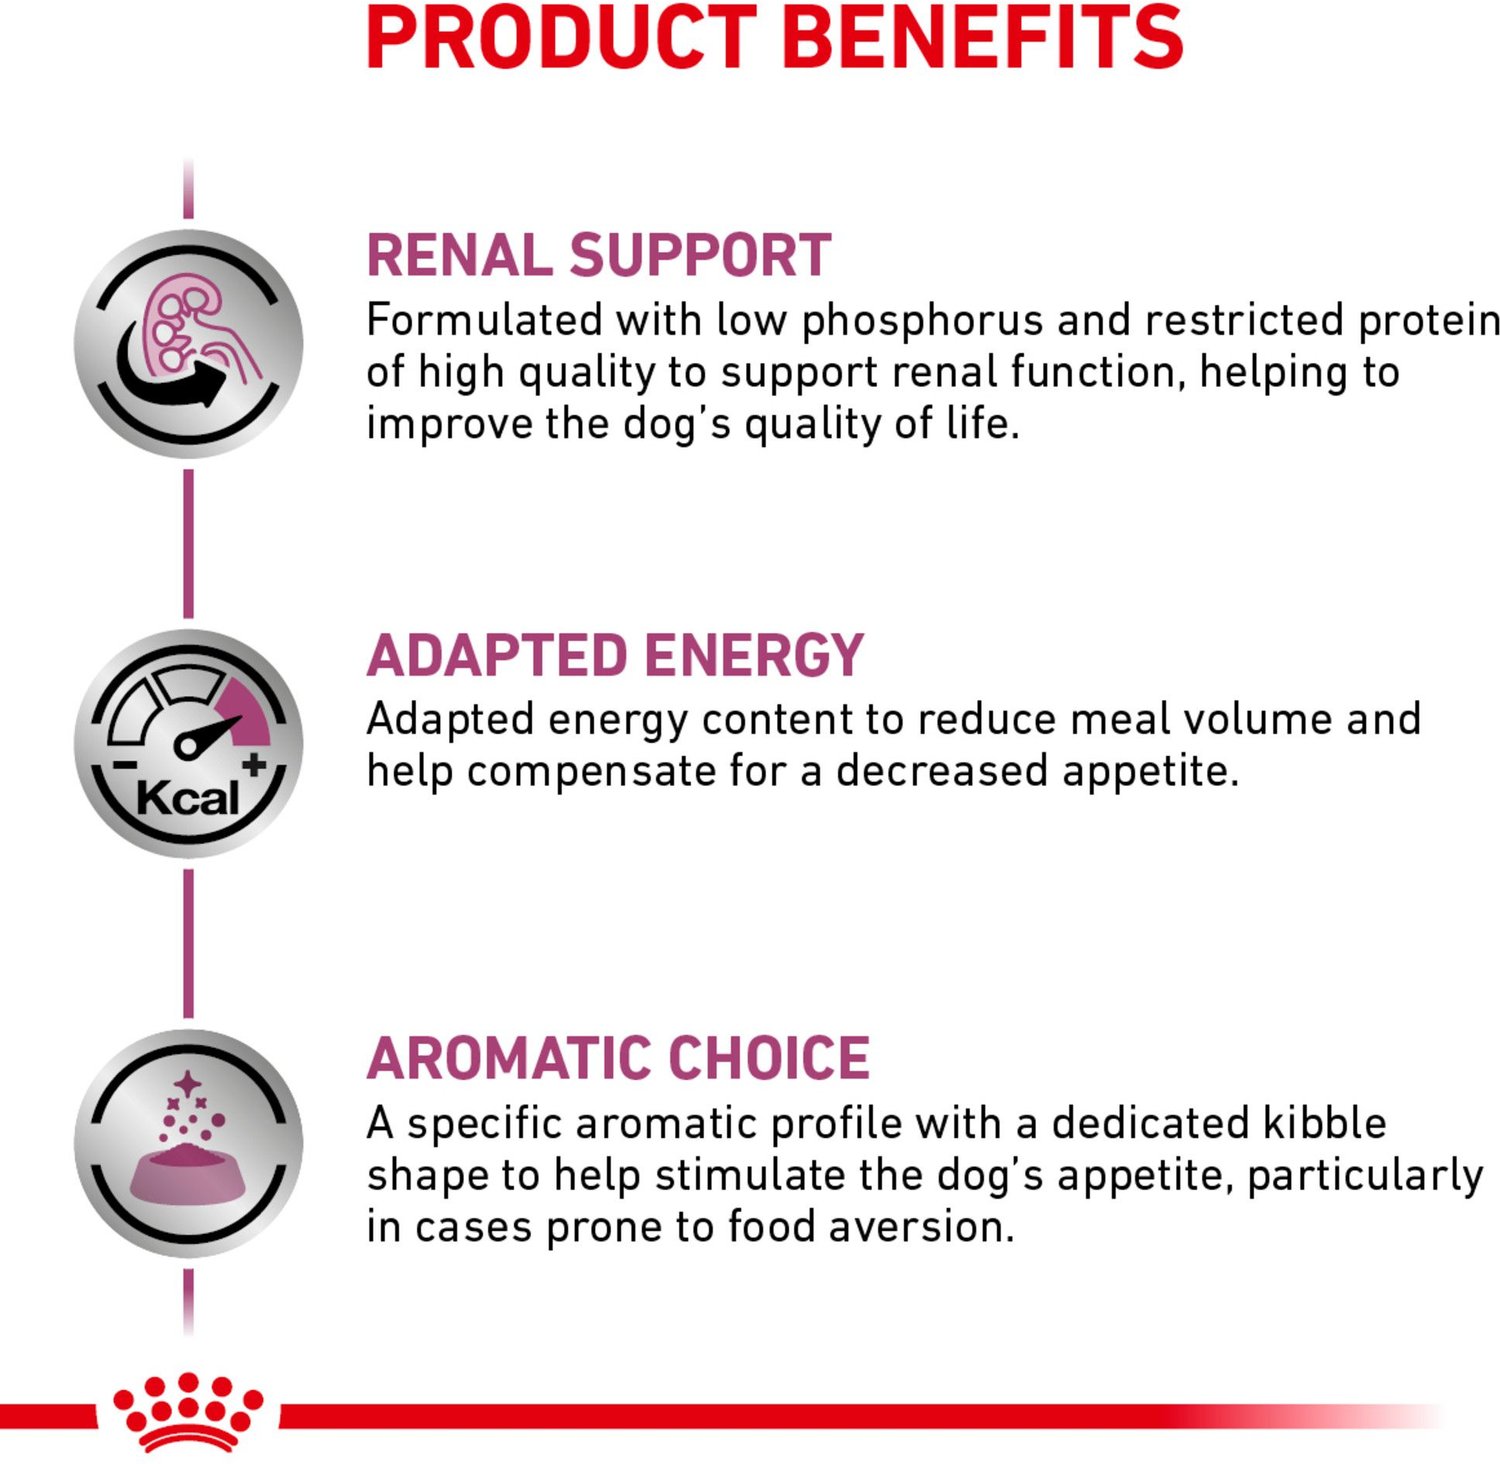 ROYAL CANIN VETERINARY DIET Renal 